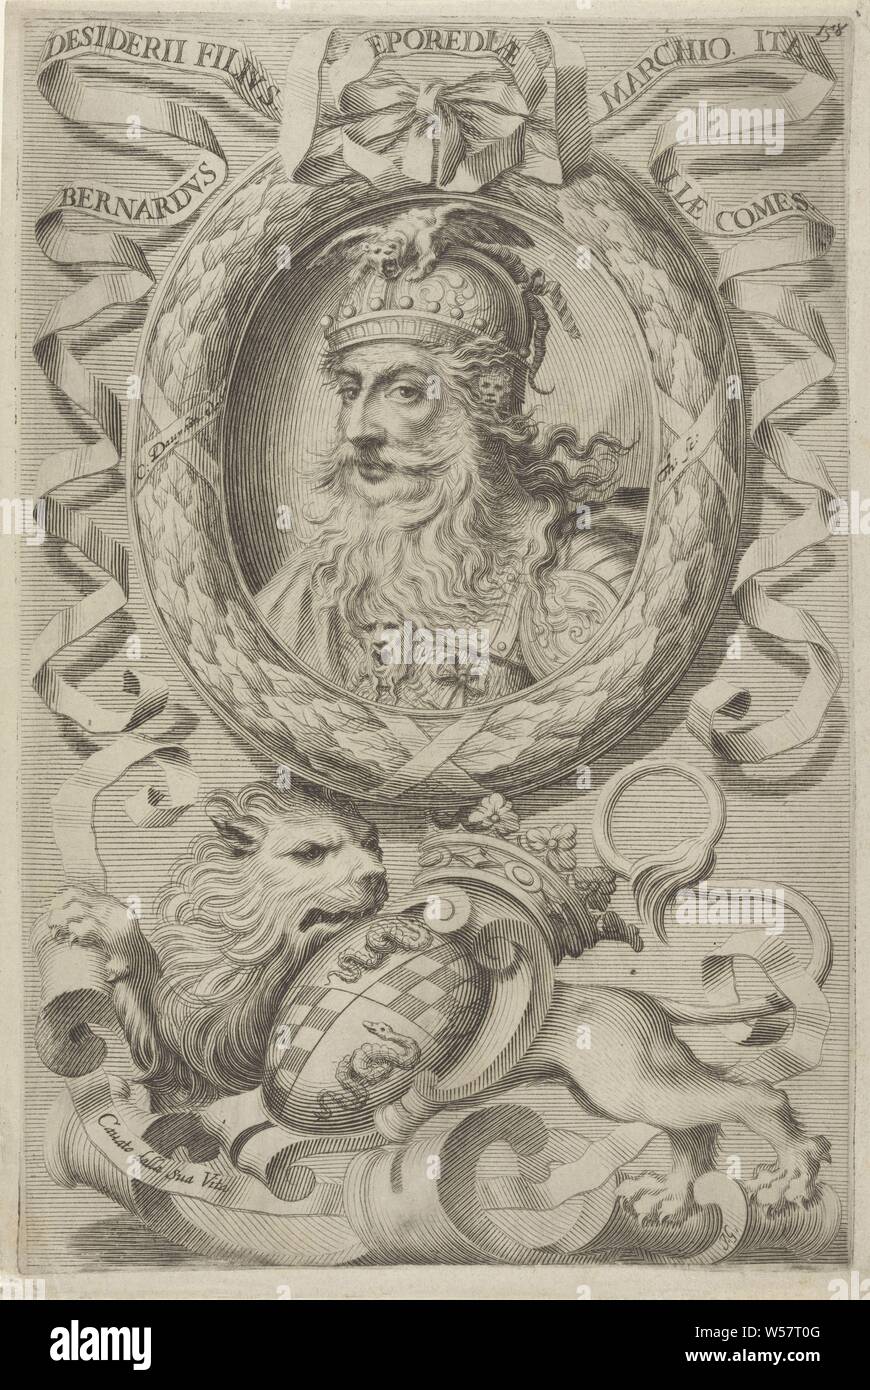 Portrait of Bernardus Desiderii Bernardus Desiderii filius Eporediae marchio Italiae comes (title on object), Numbered top right: 158, historical persons, coat of arms (symbol of sovereignty), beasts of prey, predatory animals: lion, Bernardus Desiderii, Joseph Greuter (mentioned on object), Italy, c. 1650, paper, engraving, h 248 mm × w 165 mm Stock Photo